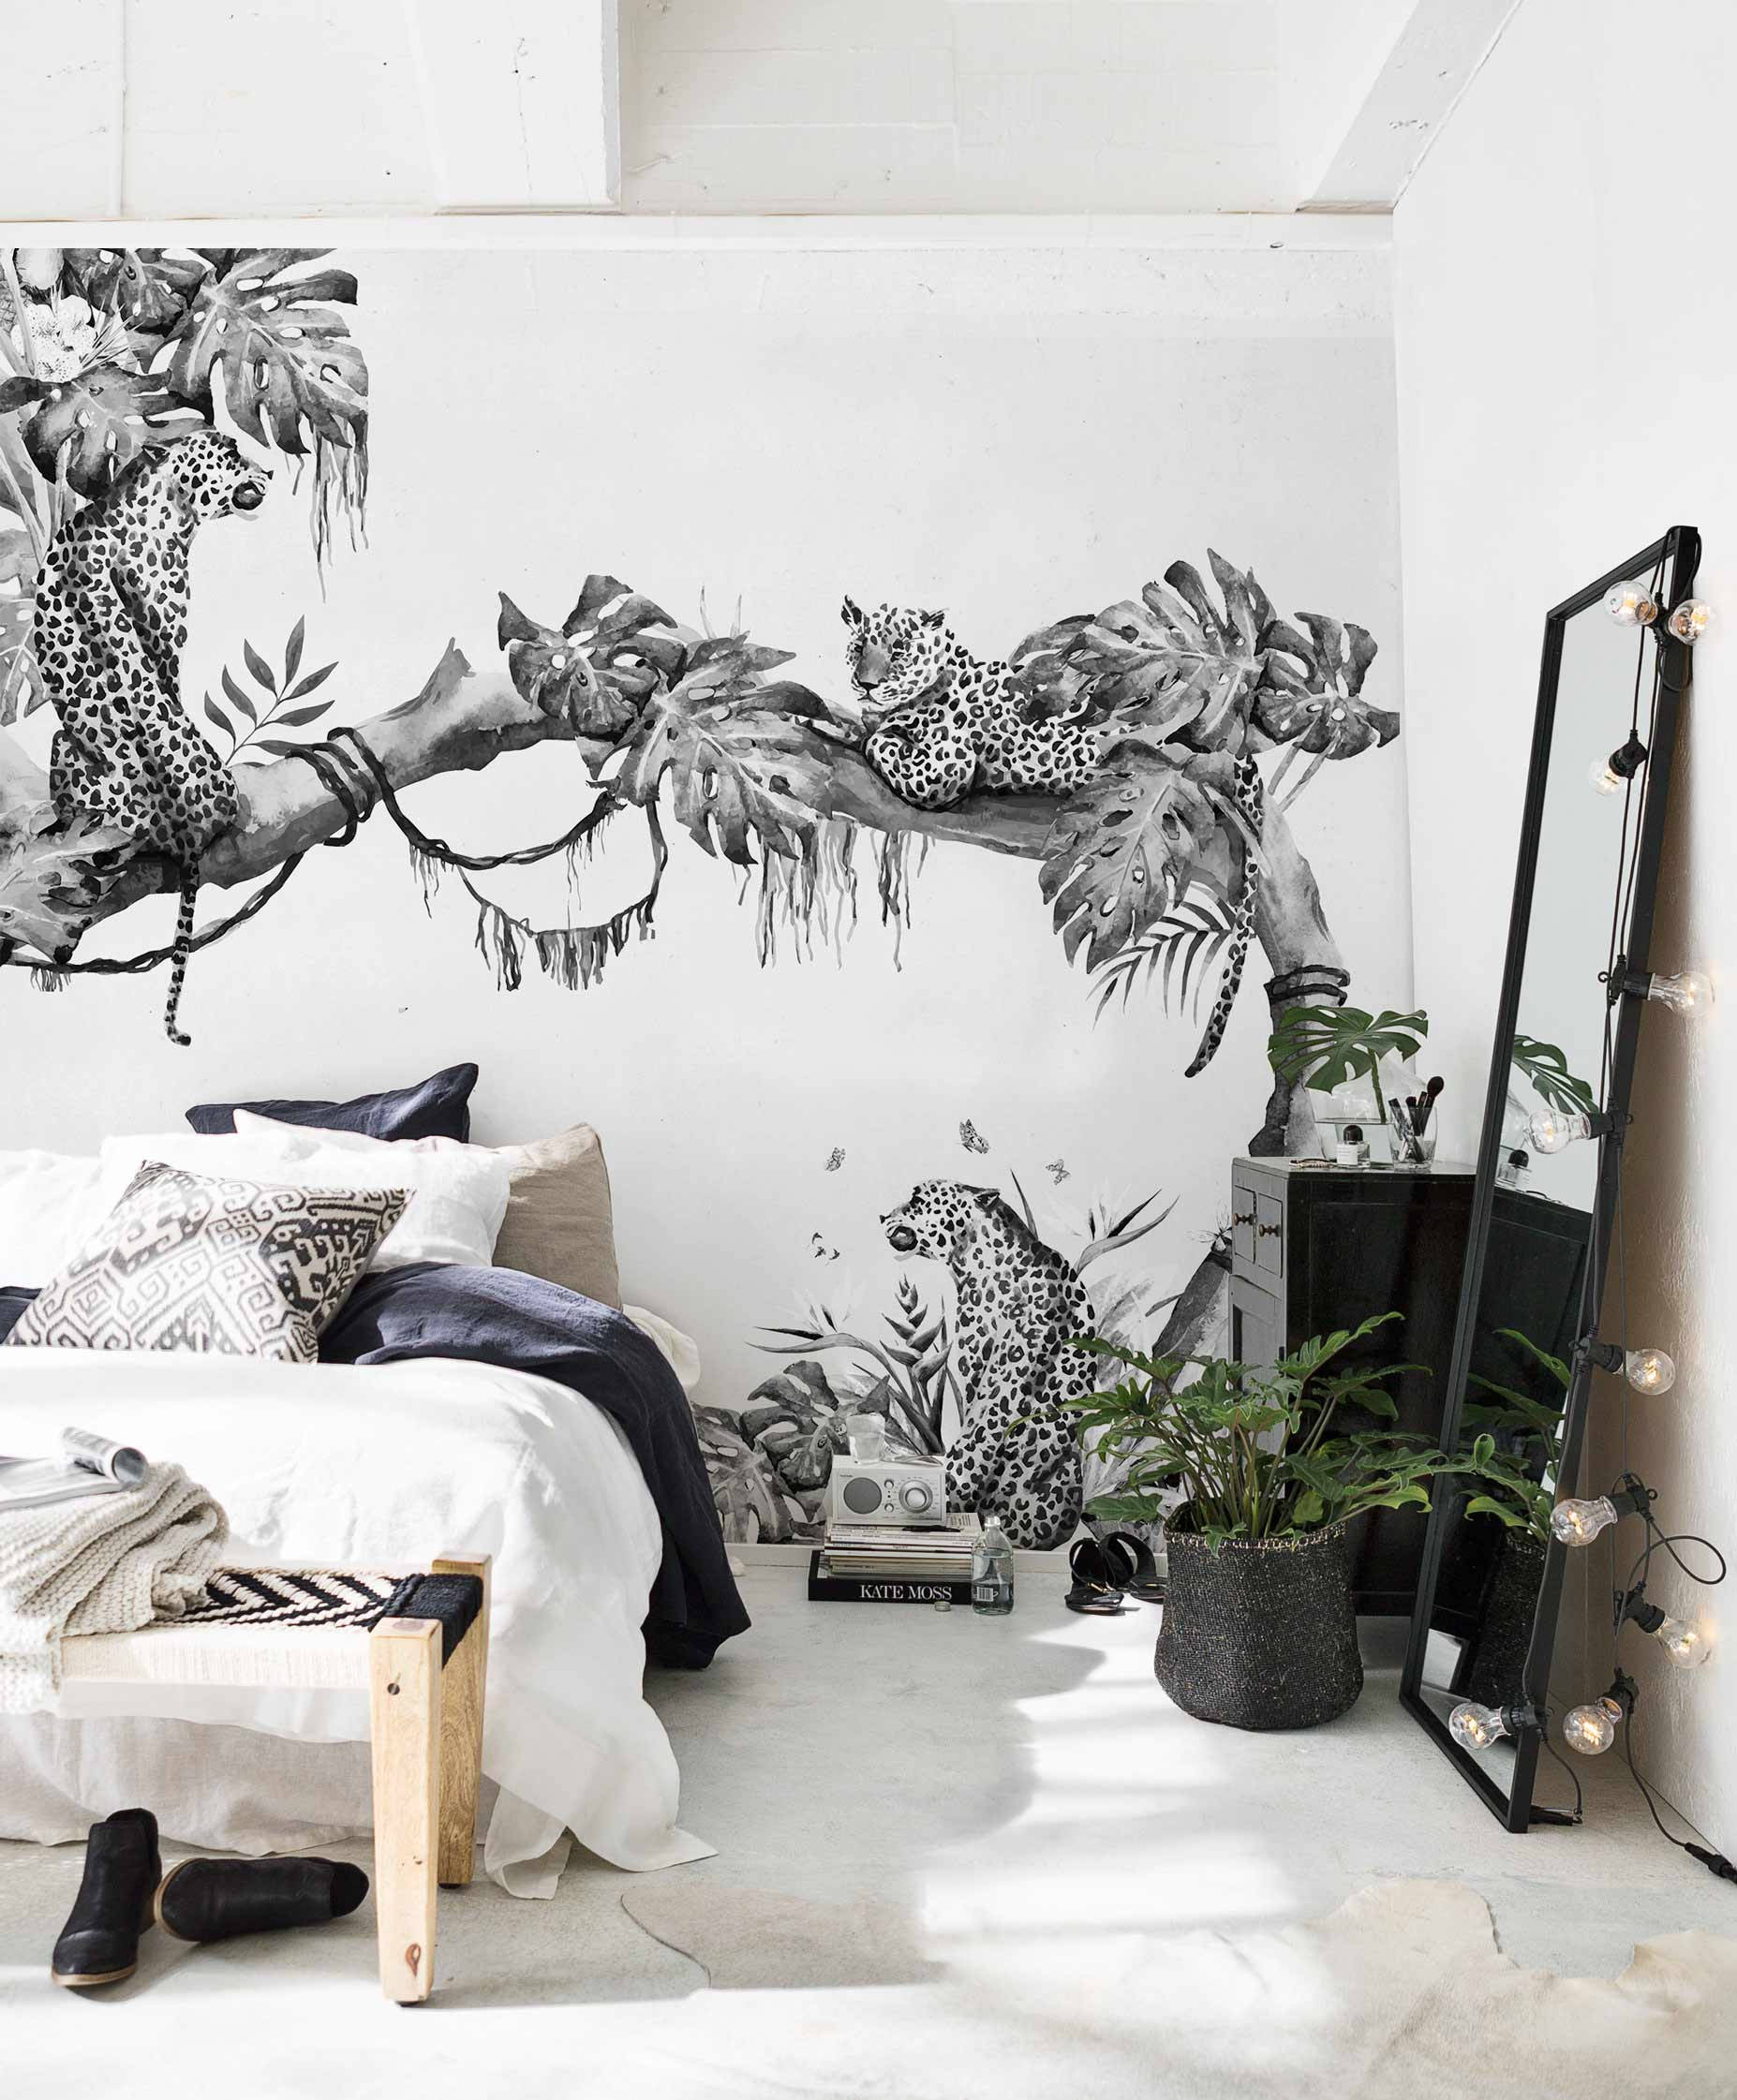 Tropical Cheetah Wall Mural from Bloomsy Wallpapers on Etsy